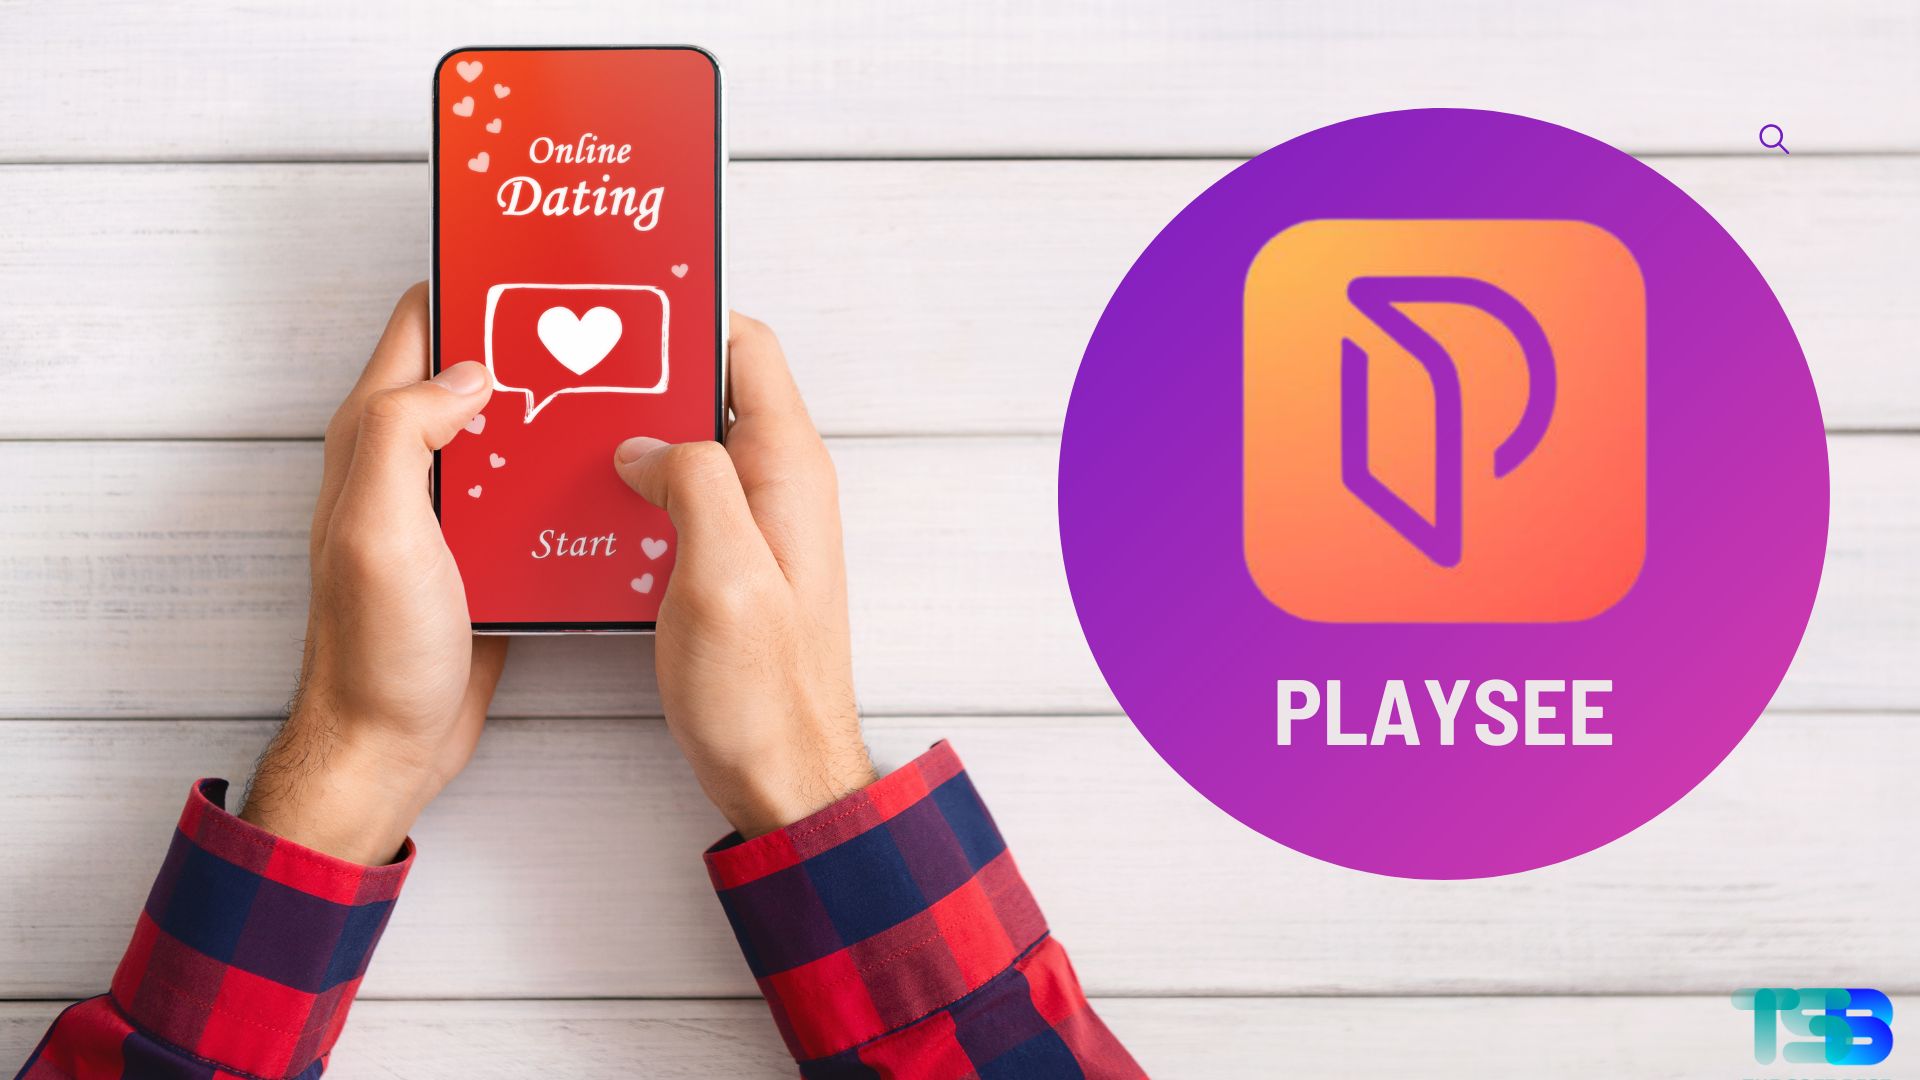 Is Playsee a dating app